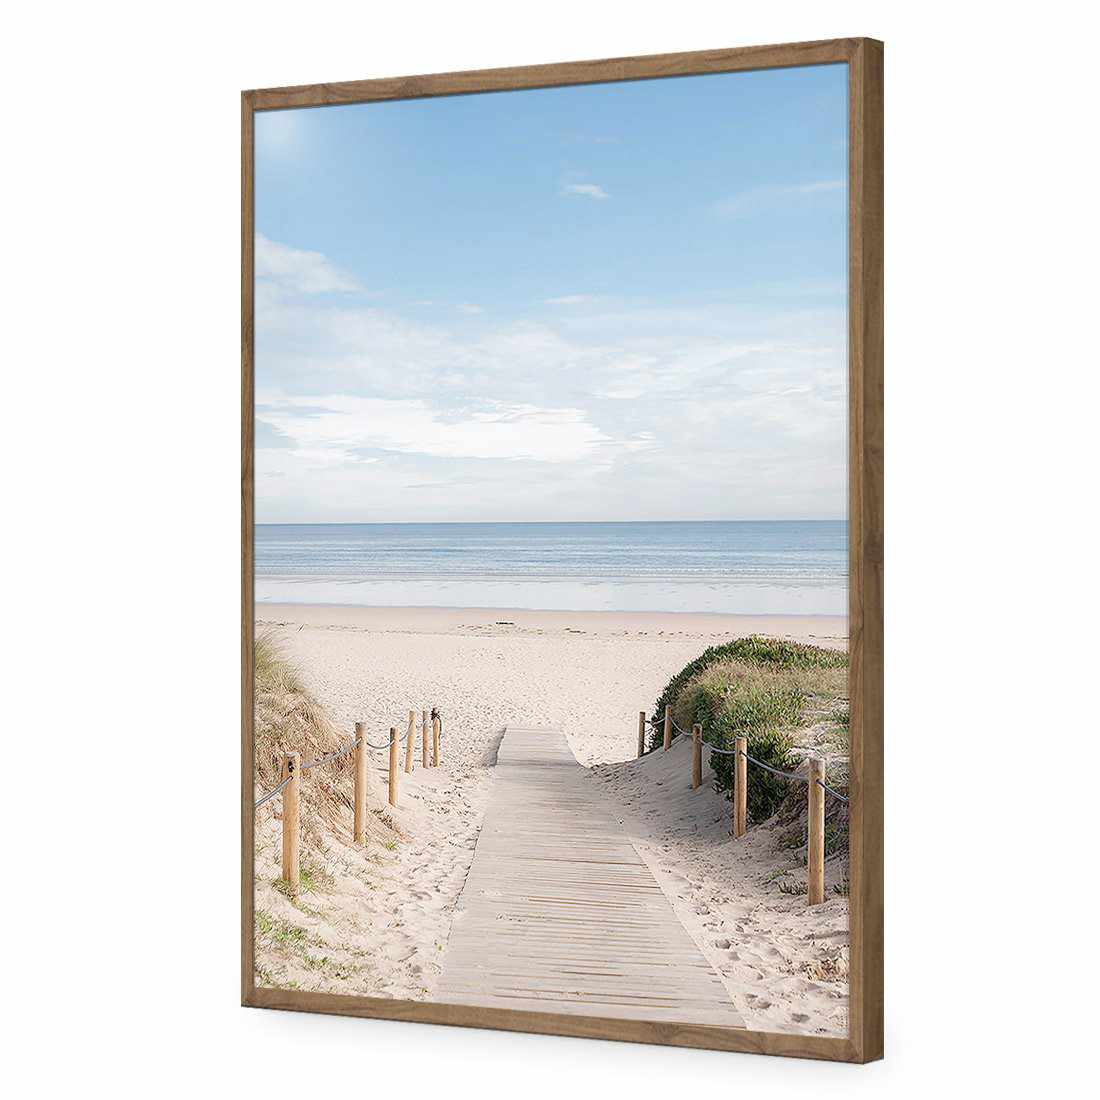 Pathway To The Sea-Acrylic-Wall Art Design-Without Border-Acrylic - Natural Frame-45x30cm-Wall Art Designs